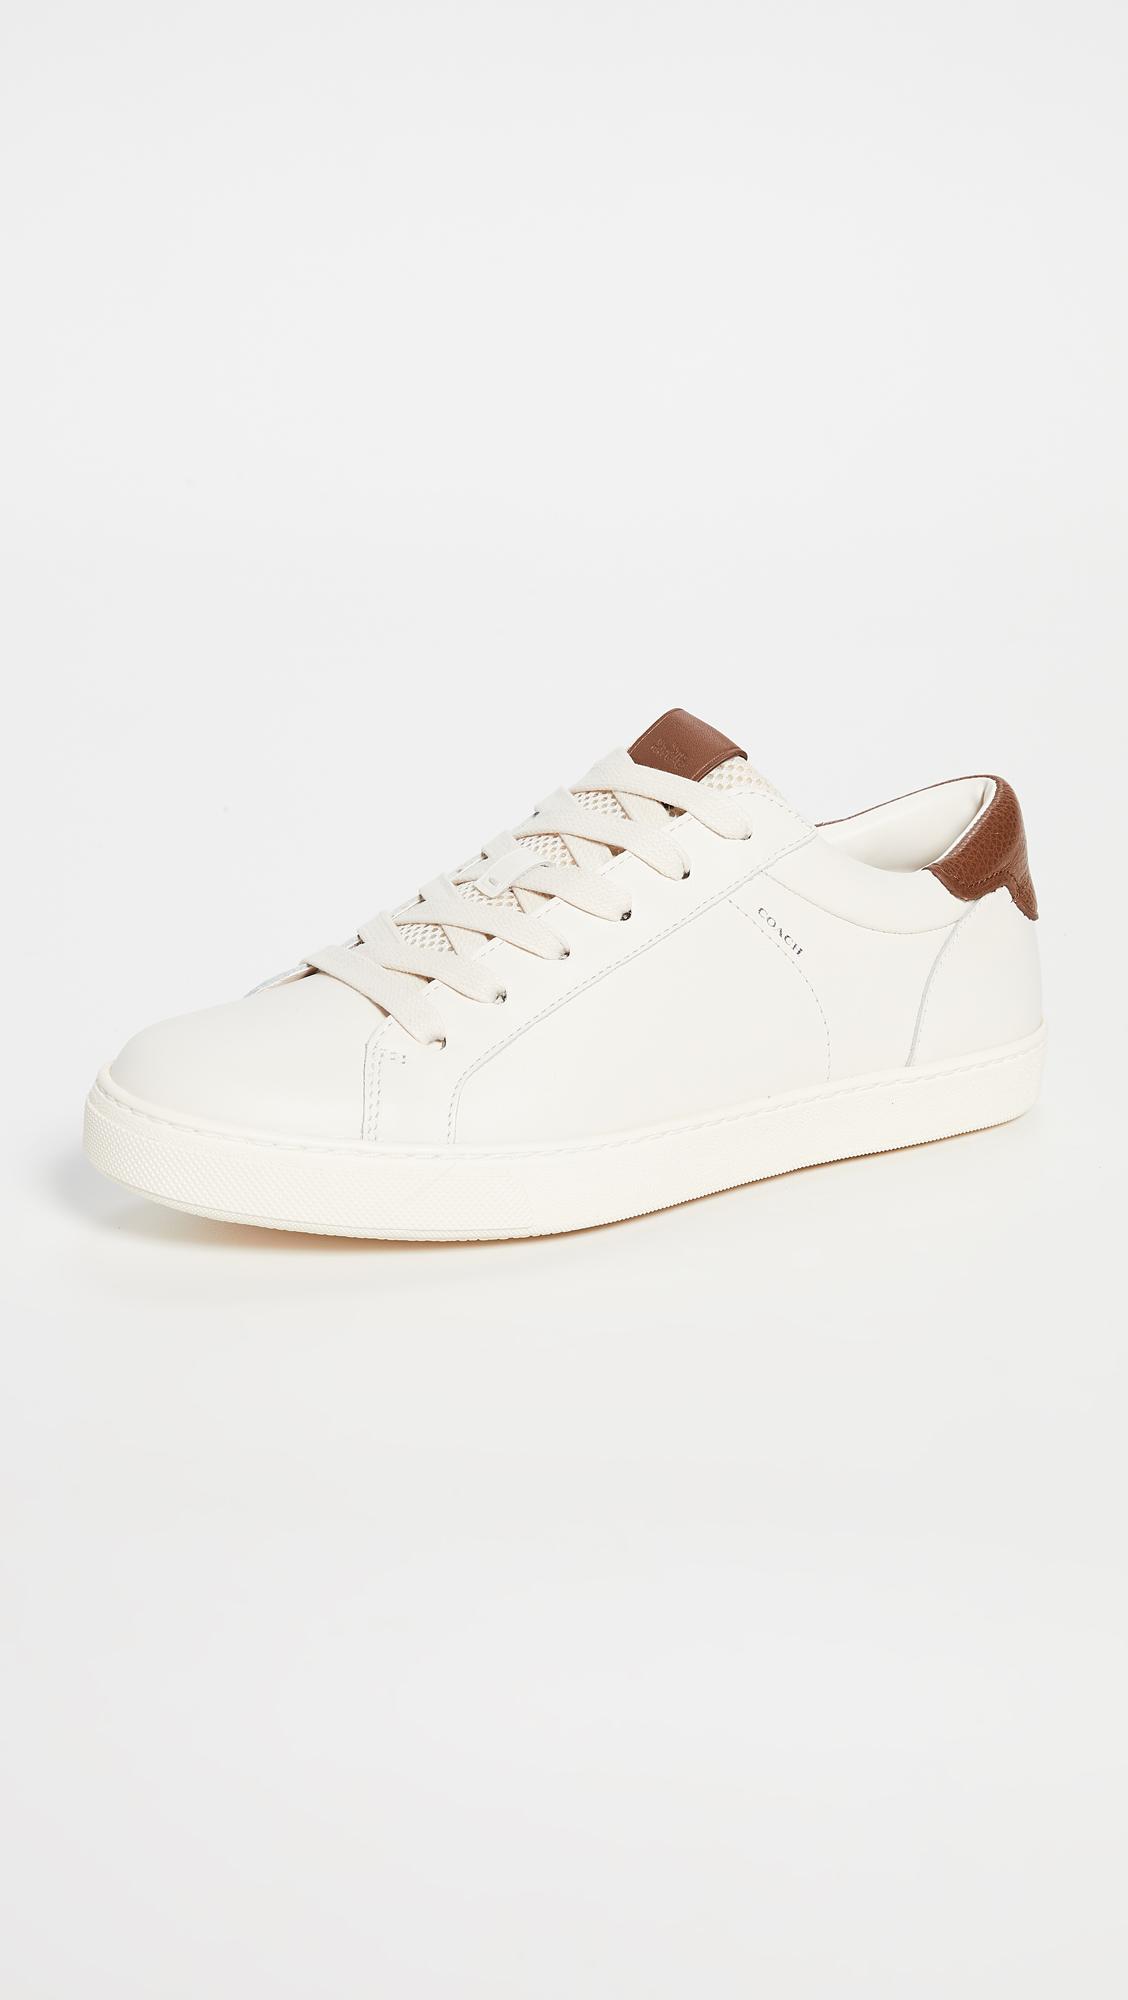 COACH Leather C126 Low Top Sneakers in White for Men - Lyst